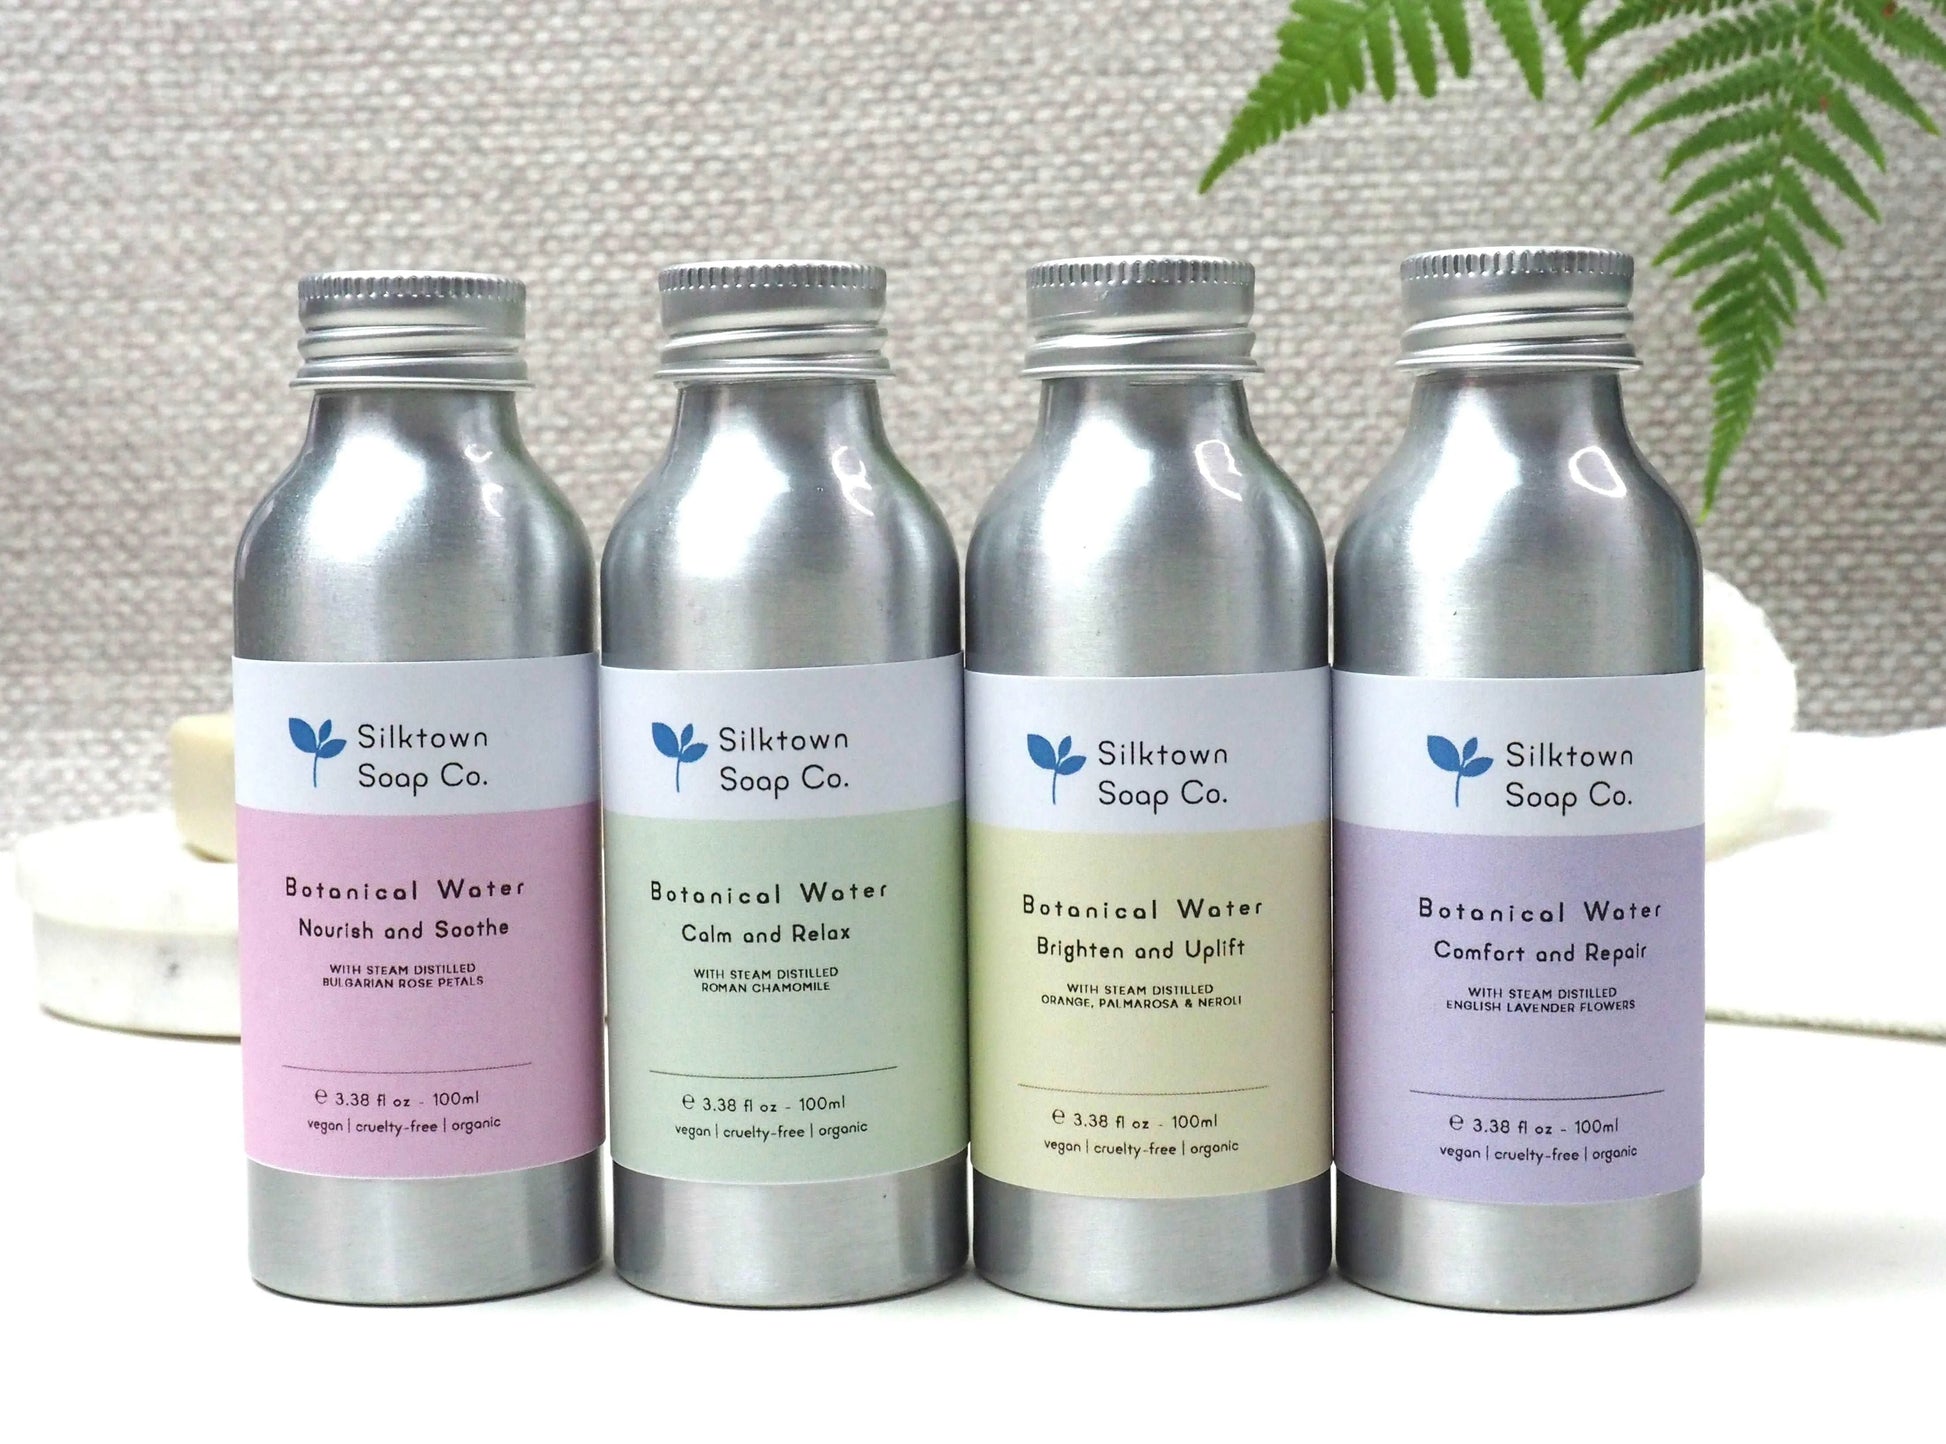 Botanical Water -  Calm and Relax